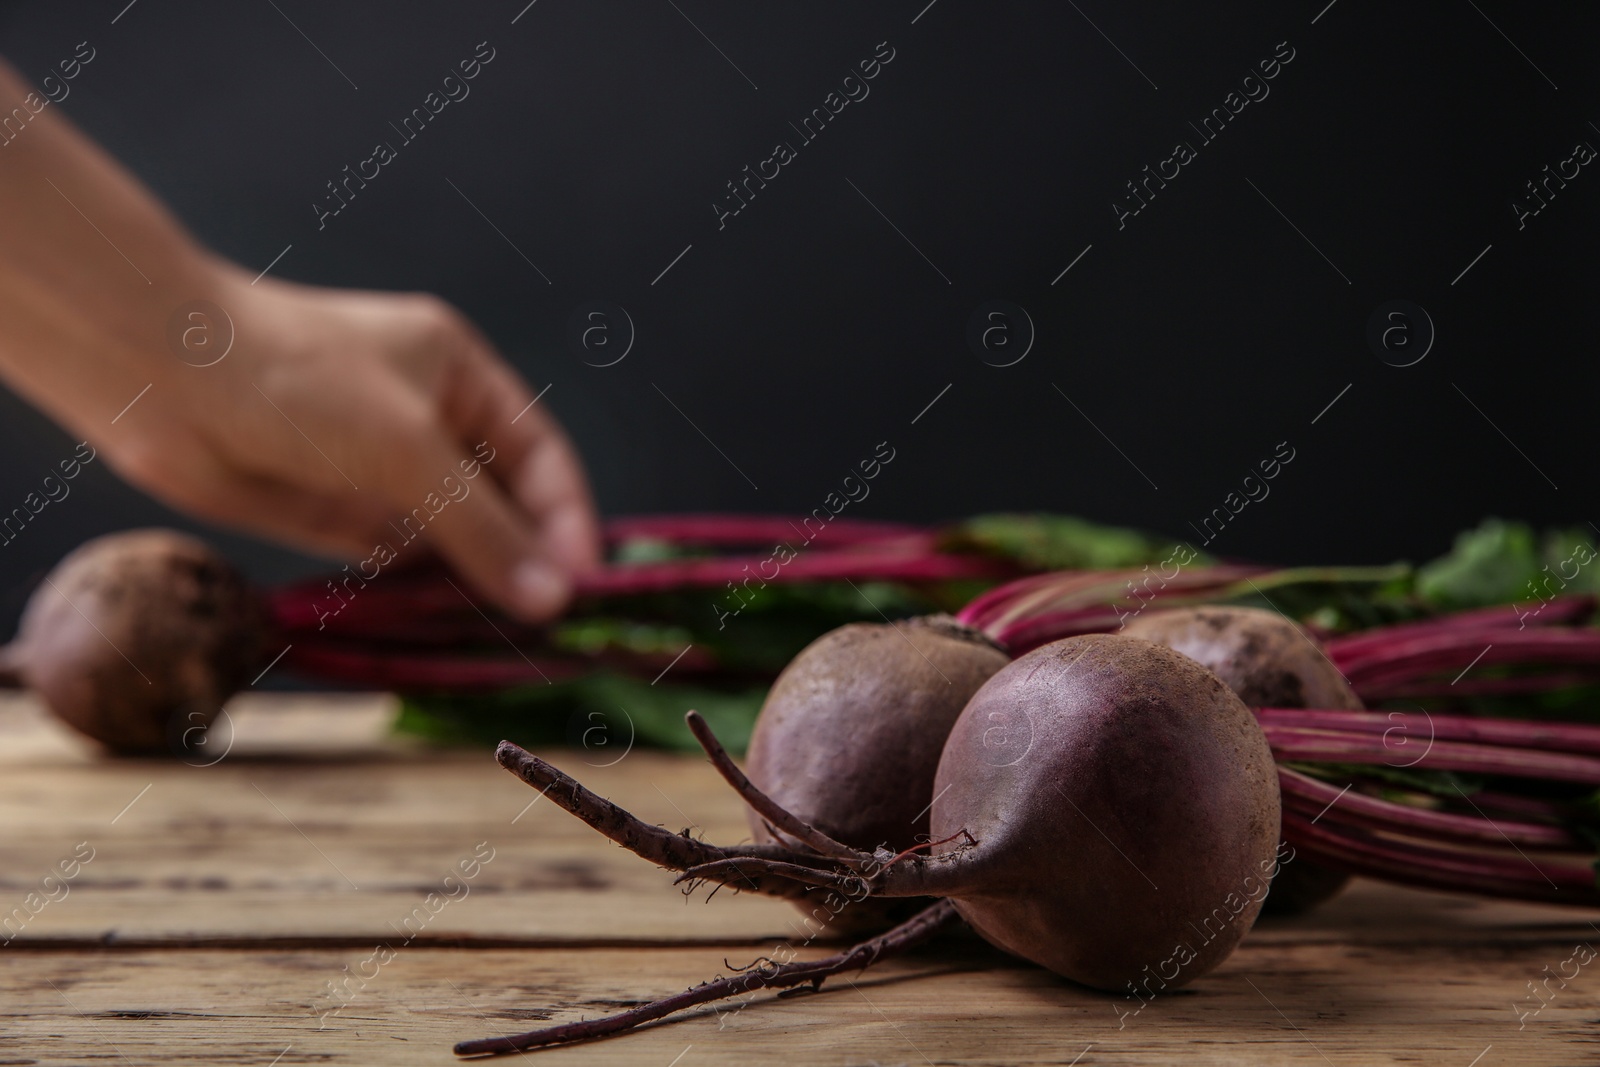 Photo of Fresh beets with leaves on wooden table against black background, closeup. Space for text